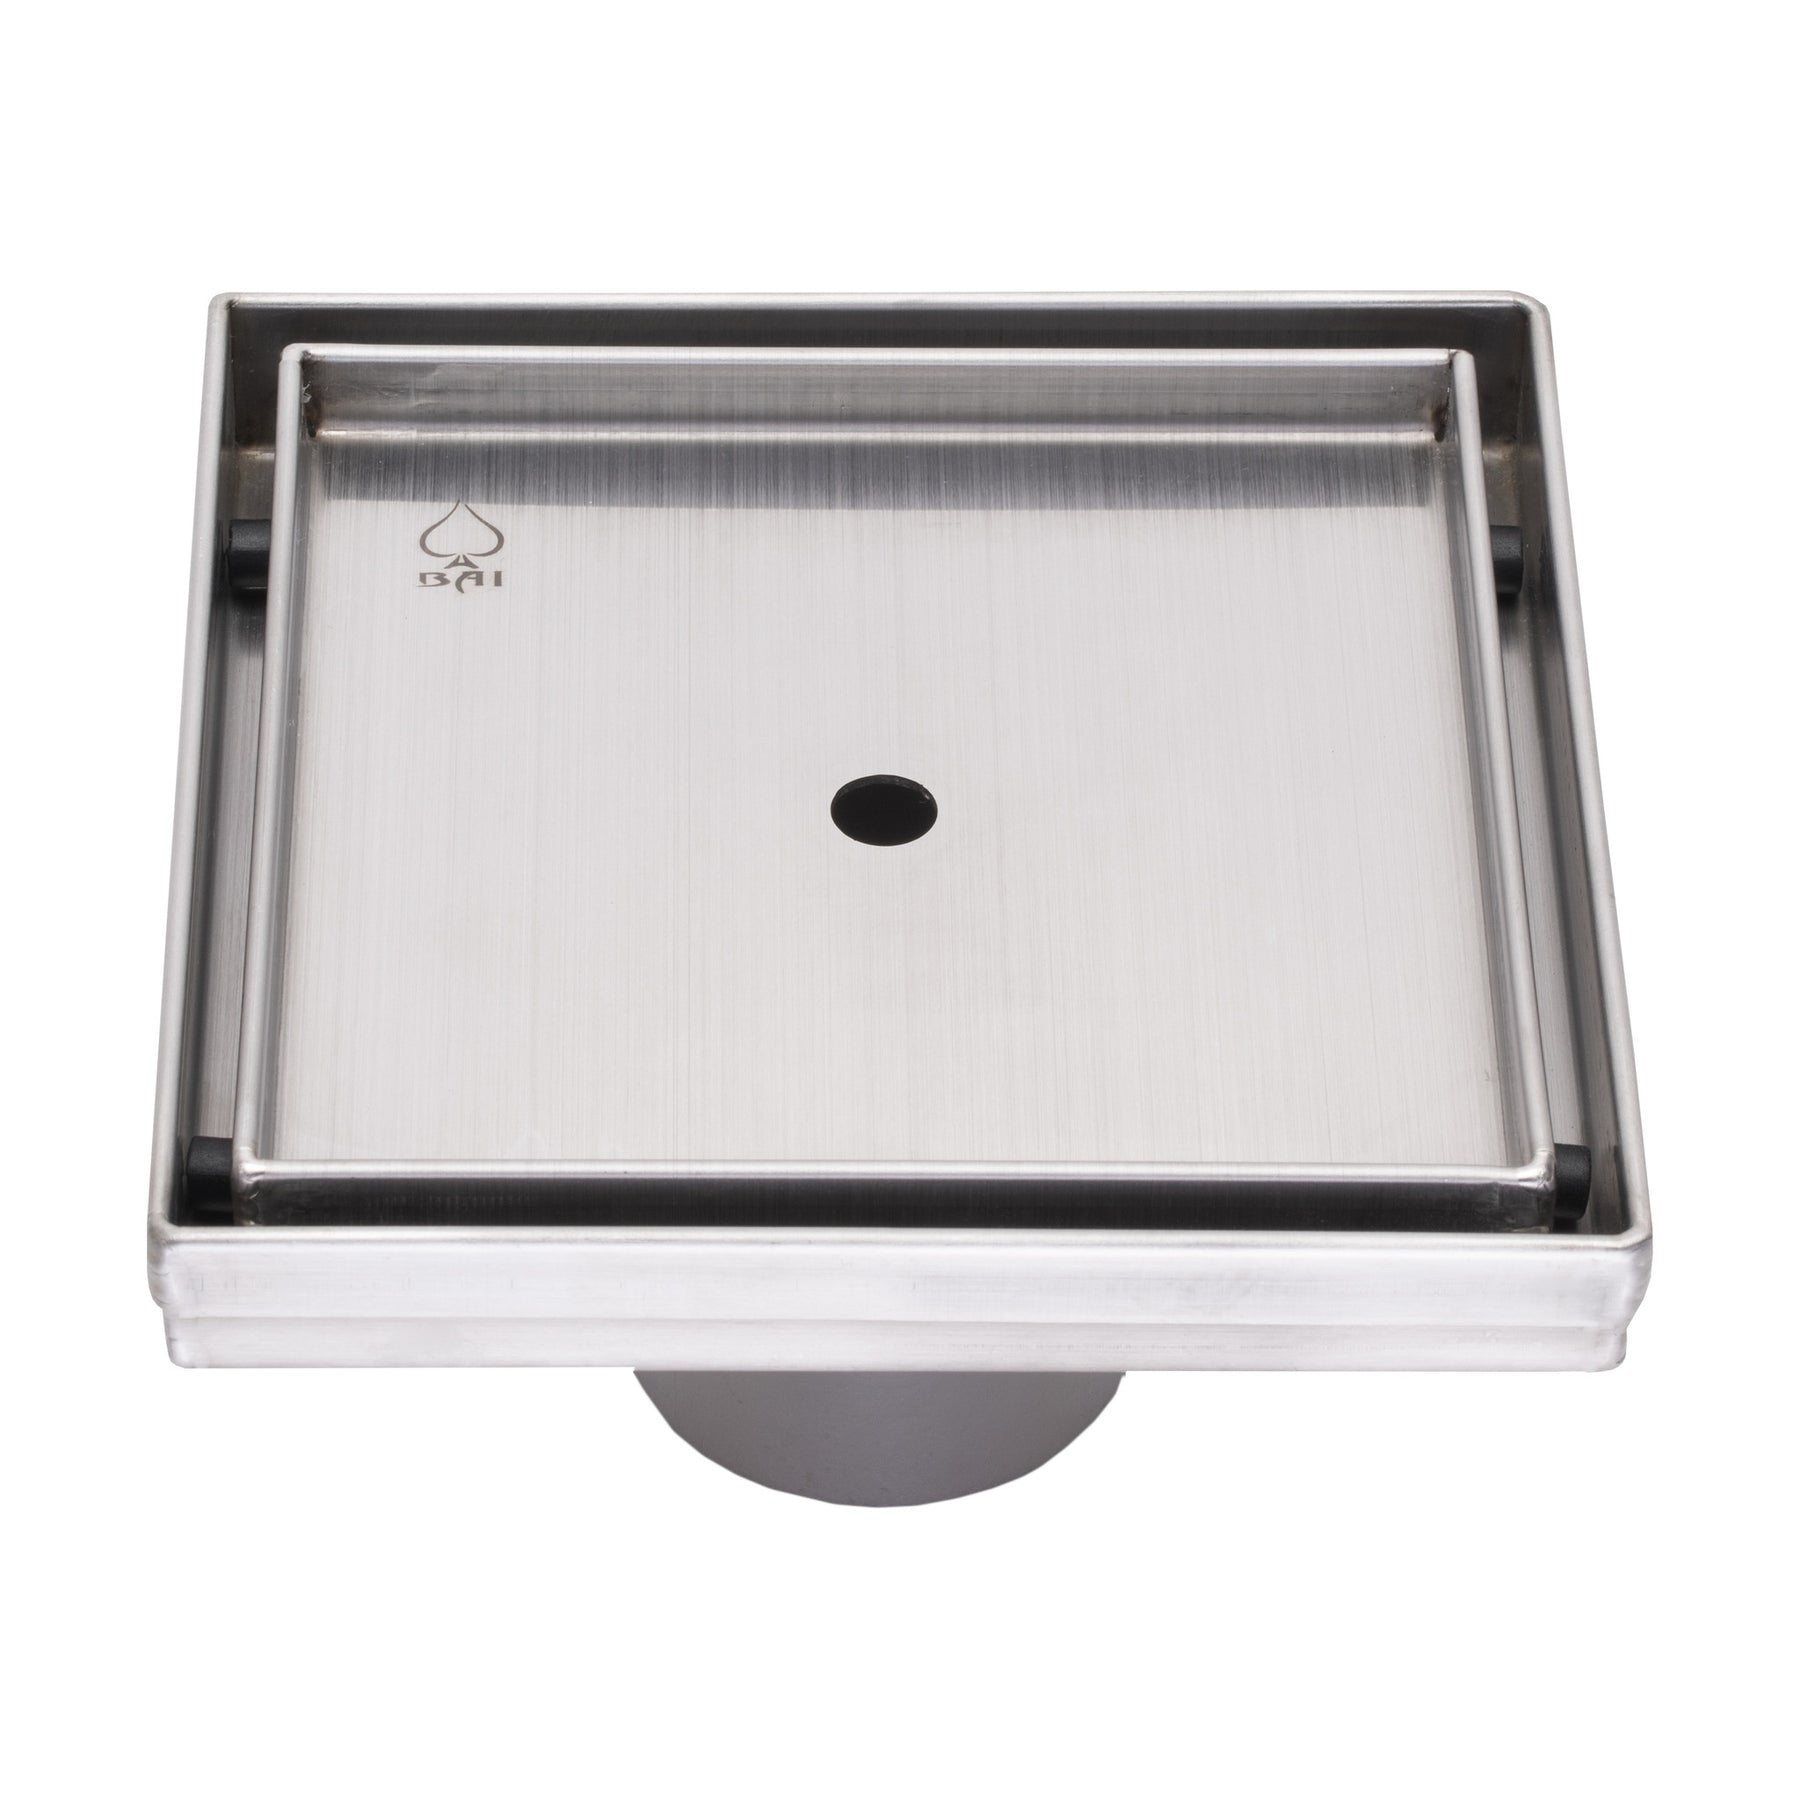 Stainless steel drain tray - Type17 - Asia